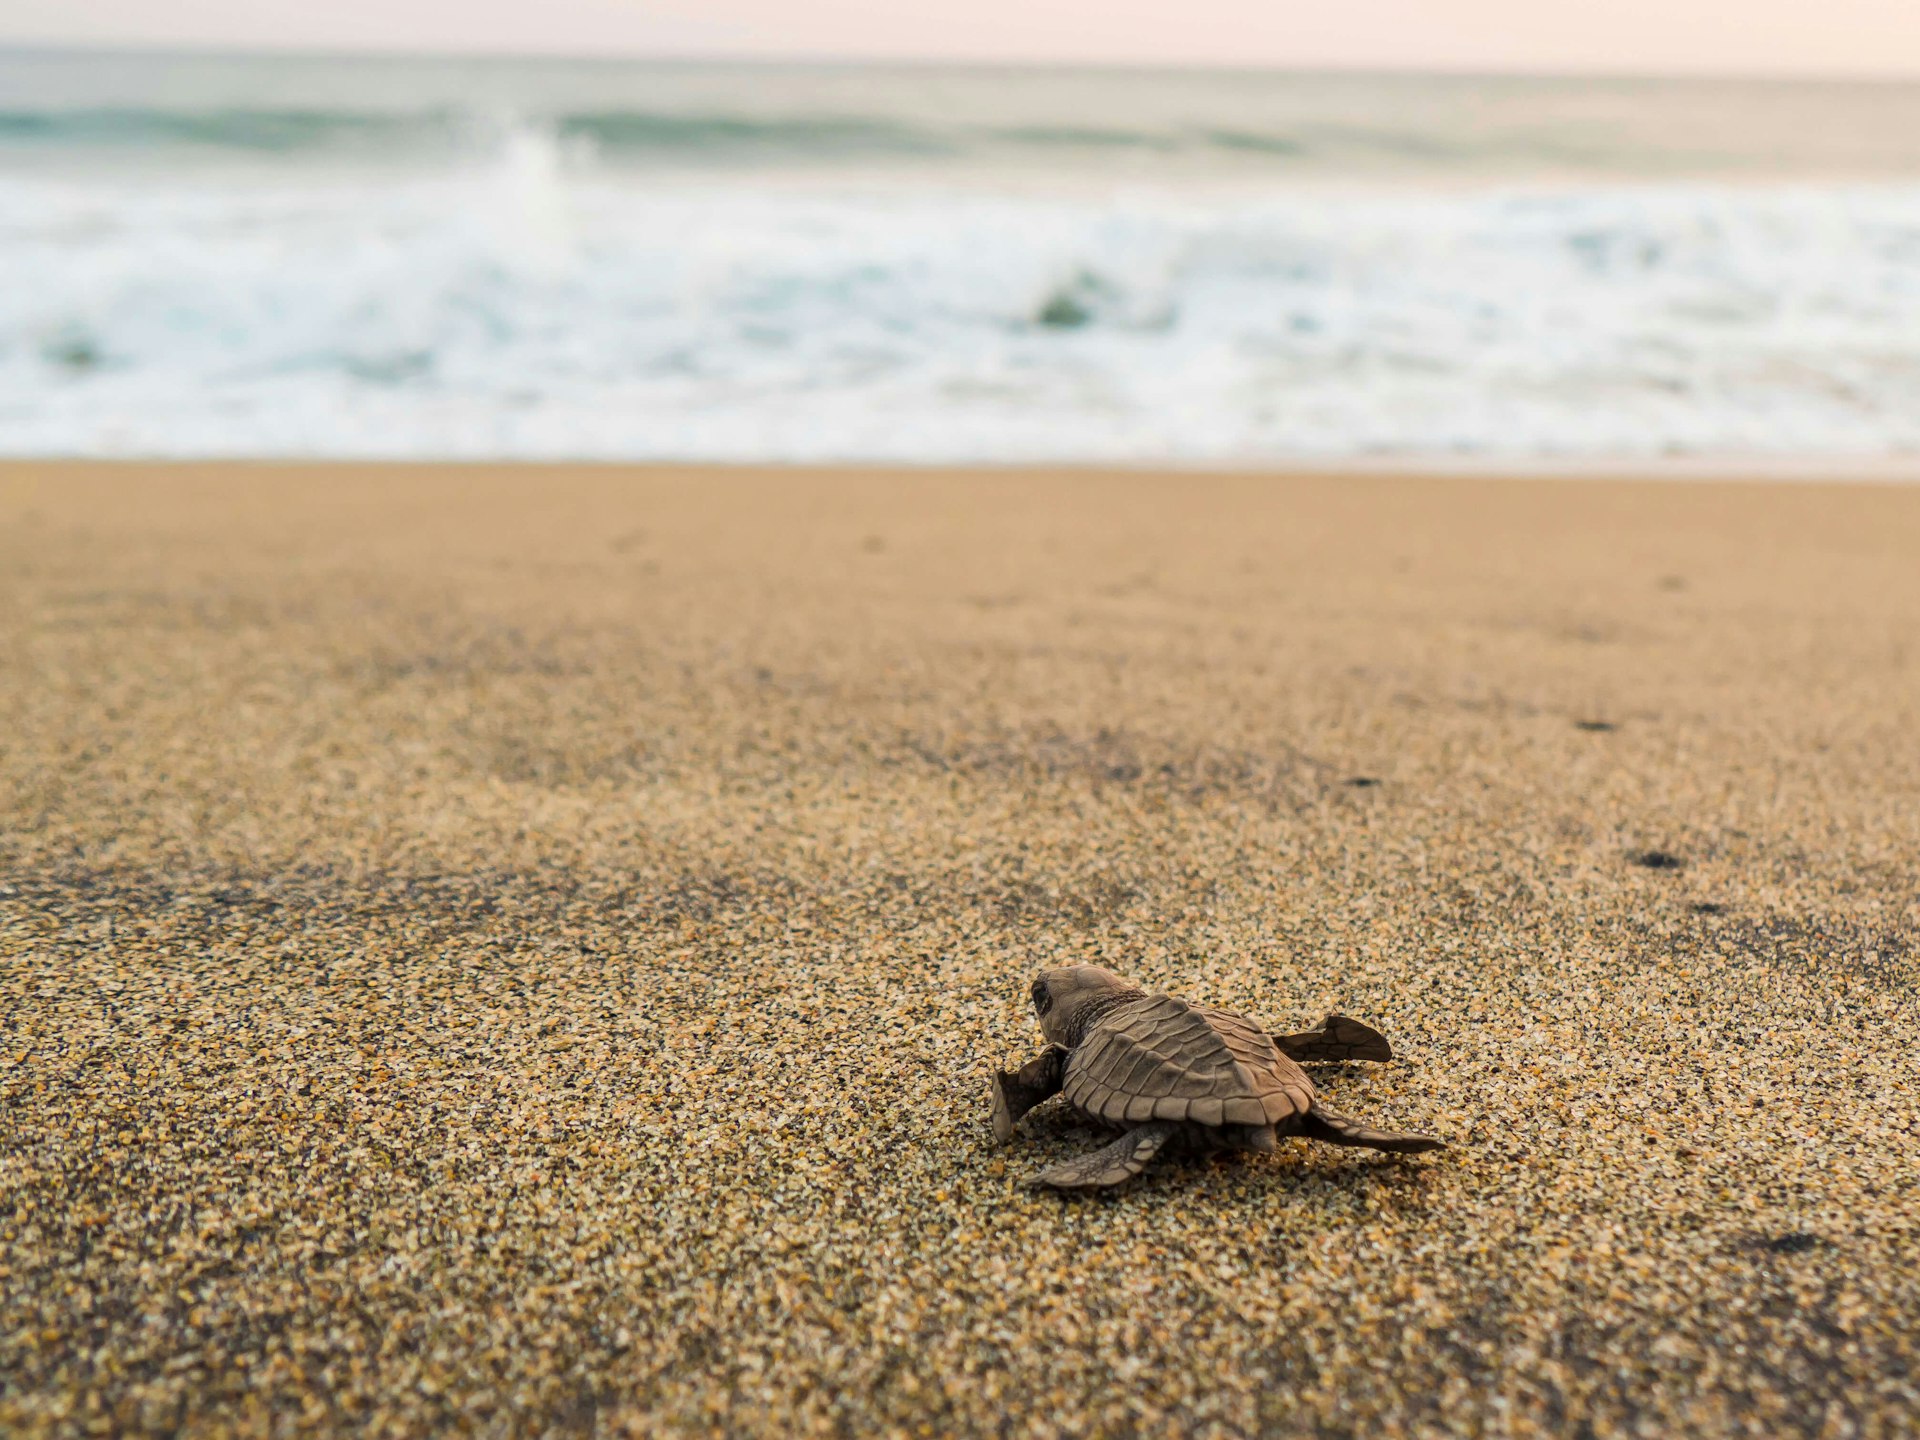 A sea turtle hatchling released to the ocean in Playa Escobilla in Mexico